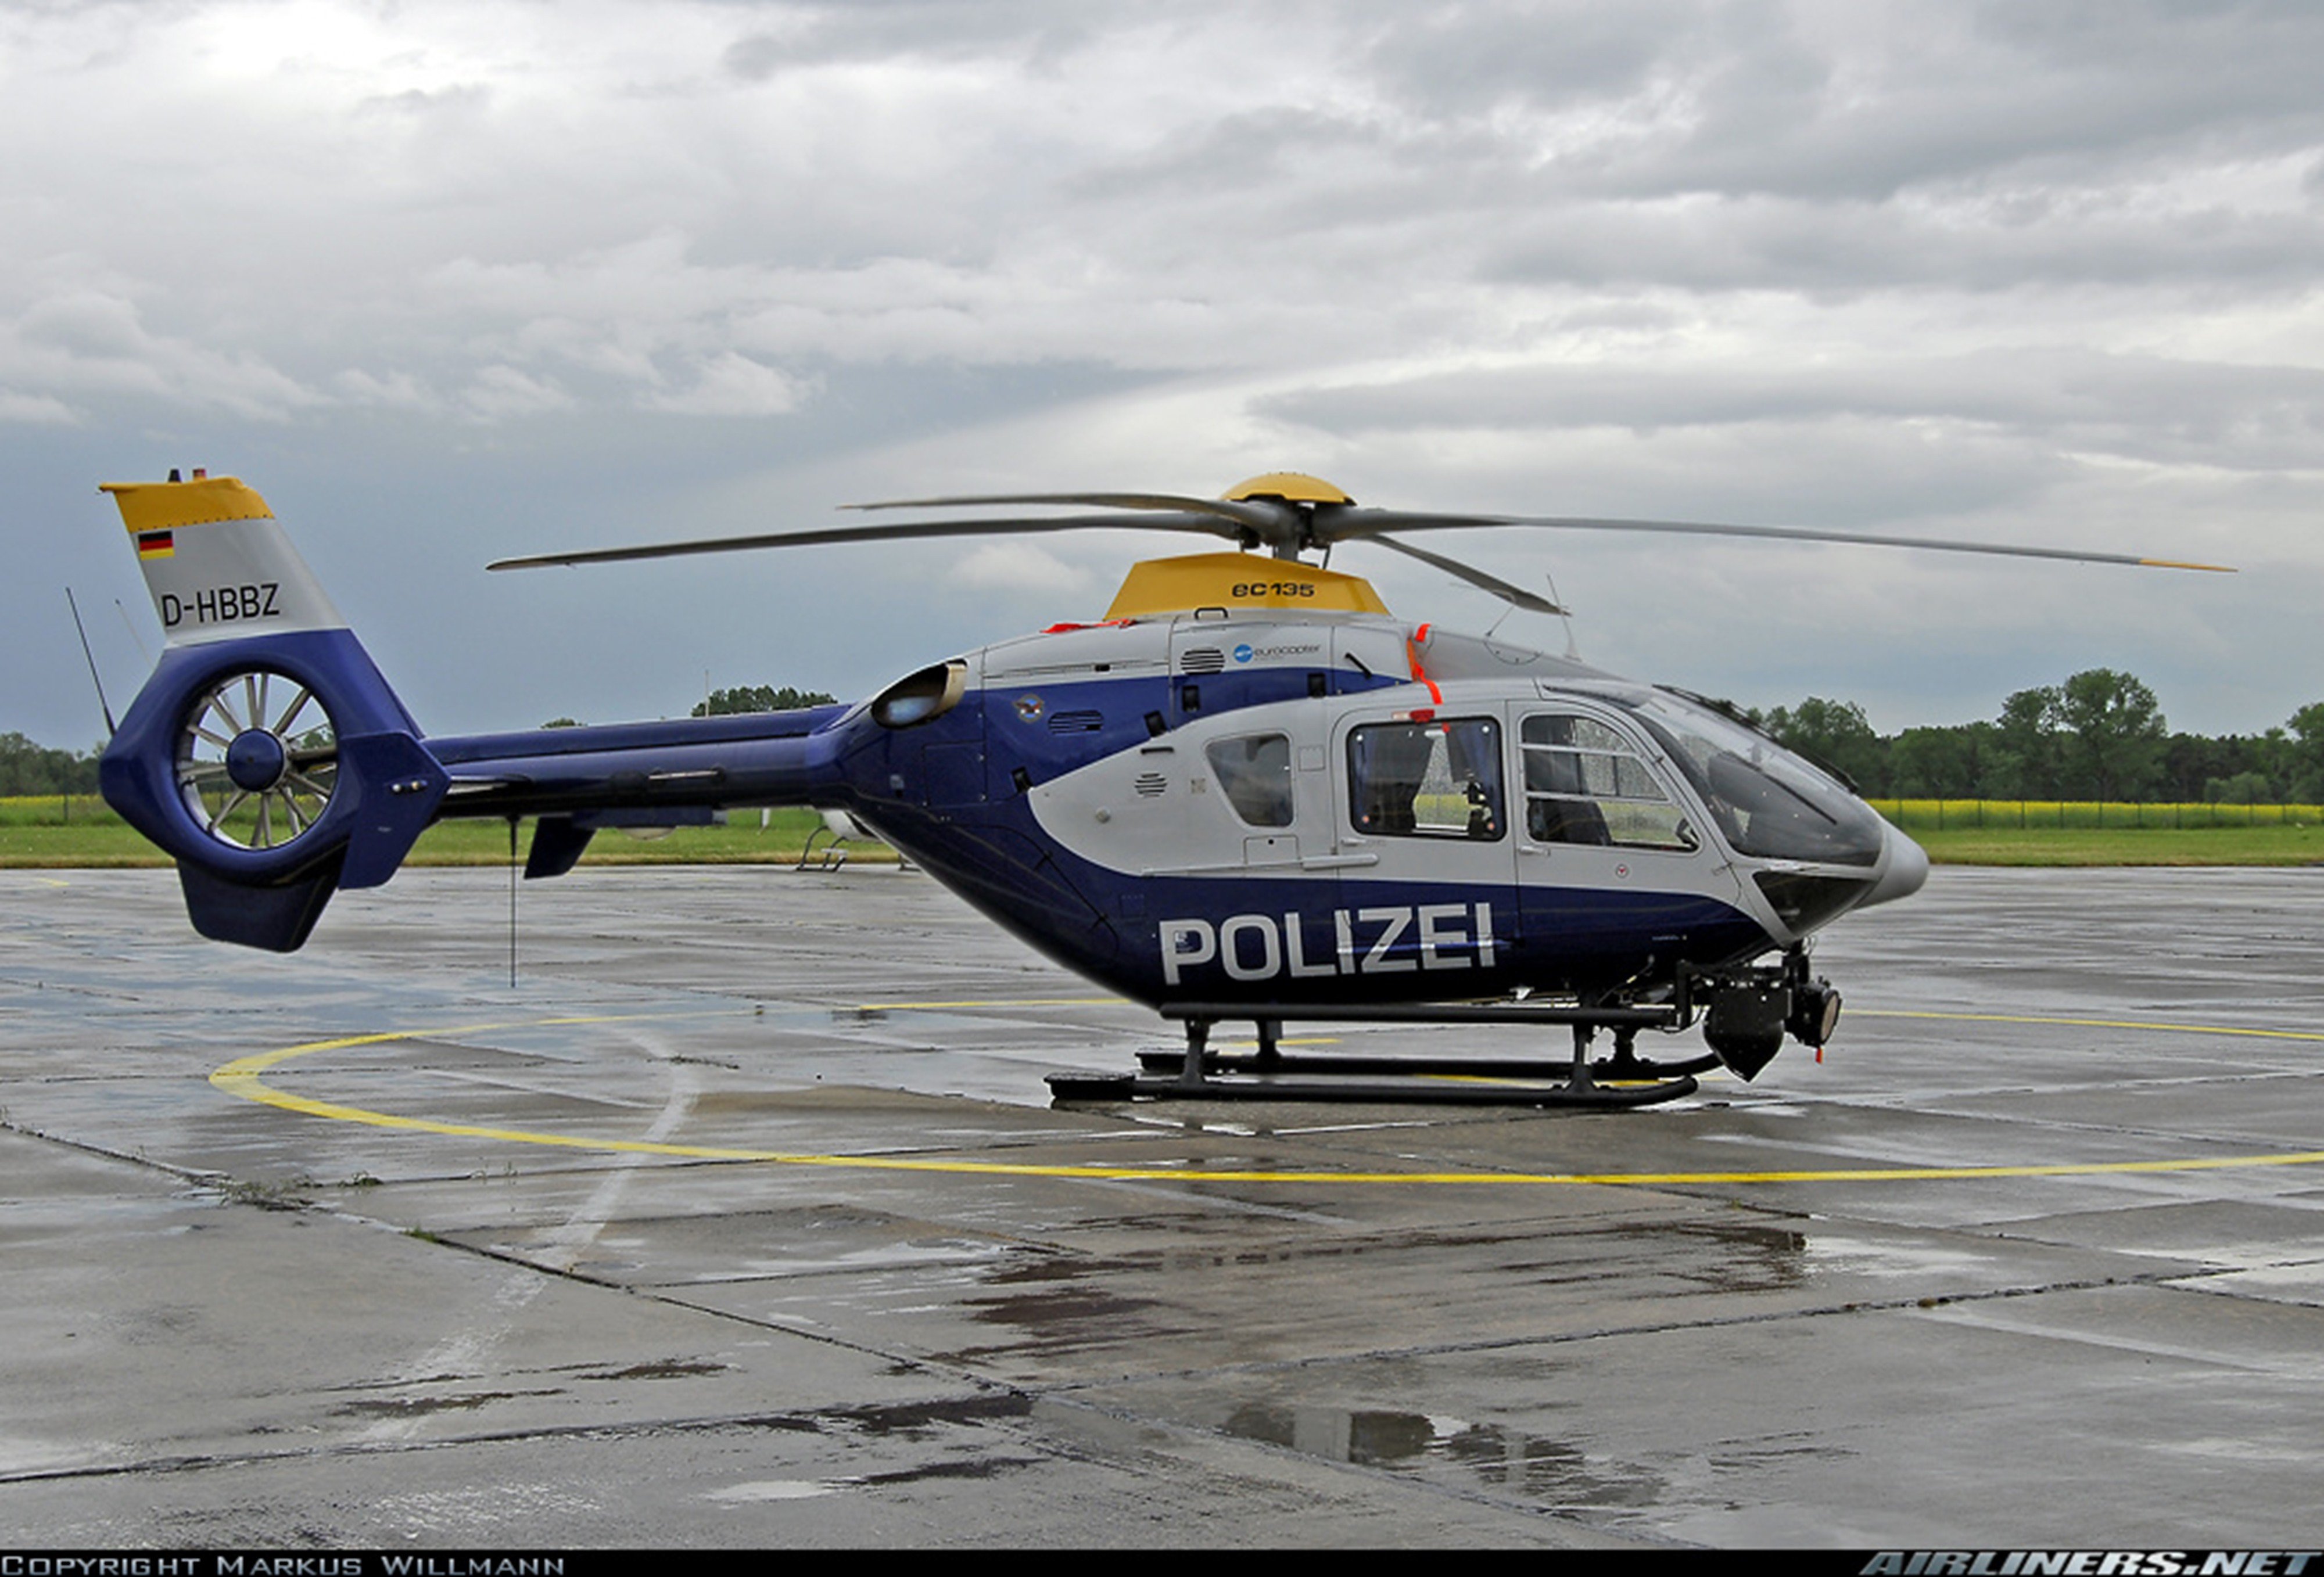 helicopter, Aircraft, Vehicle, Police, Polizei, Eurocopter, Ec135, Germany,  1 Wallpaper